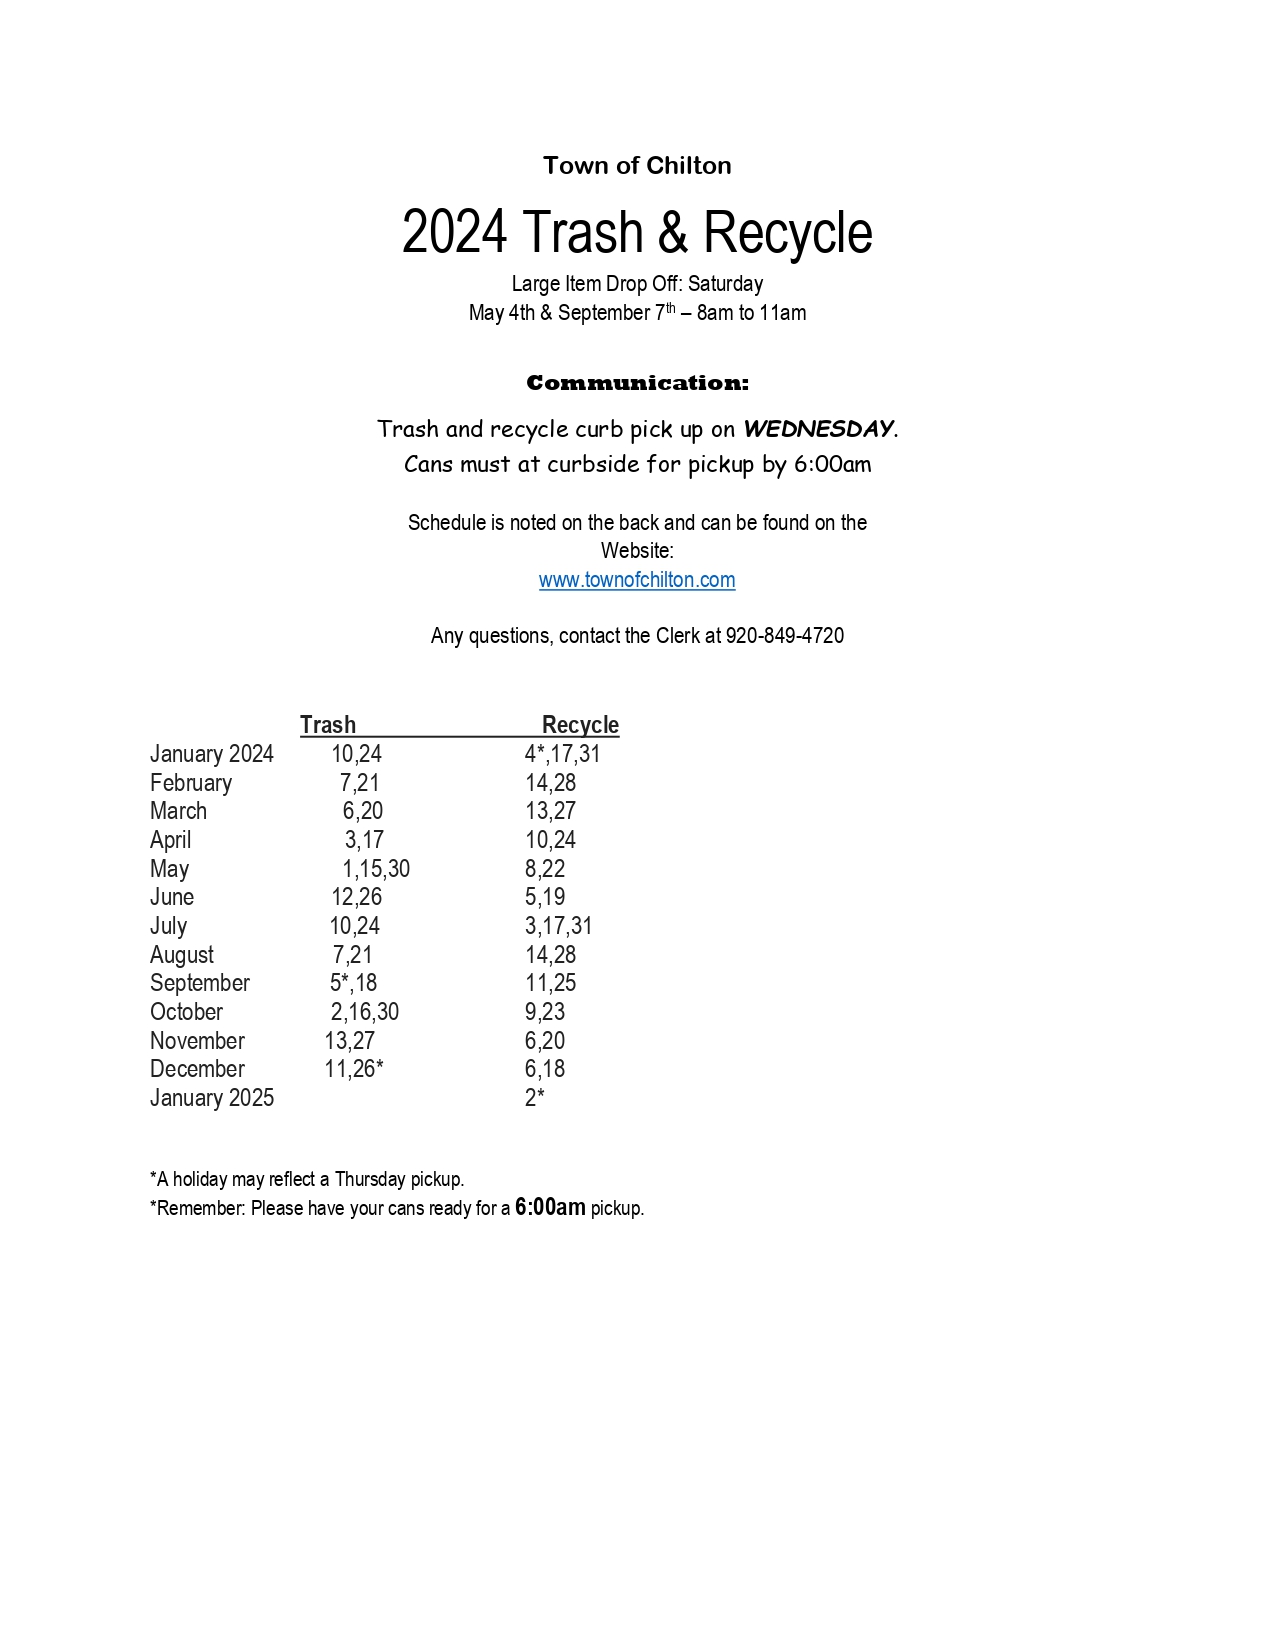 2024 Trash & Recycle Town of Chilton, Calumet County, WI